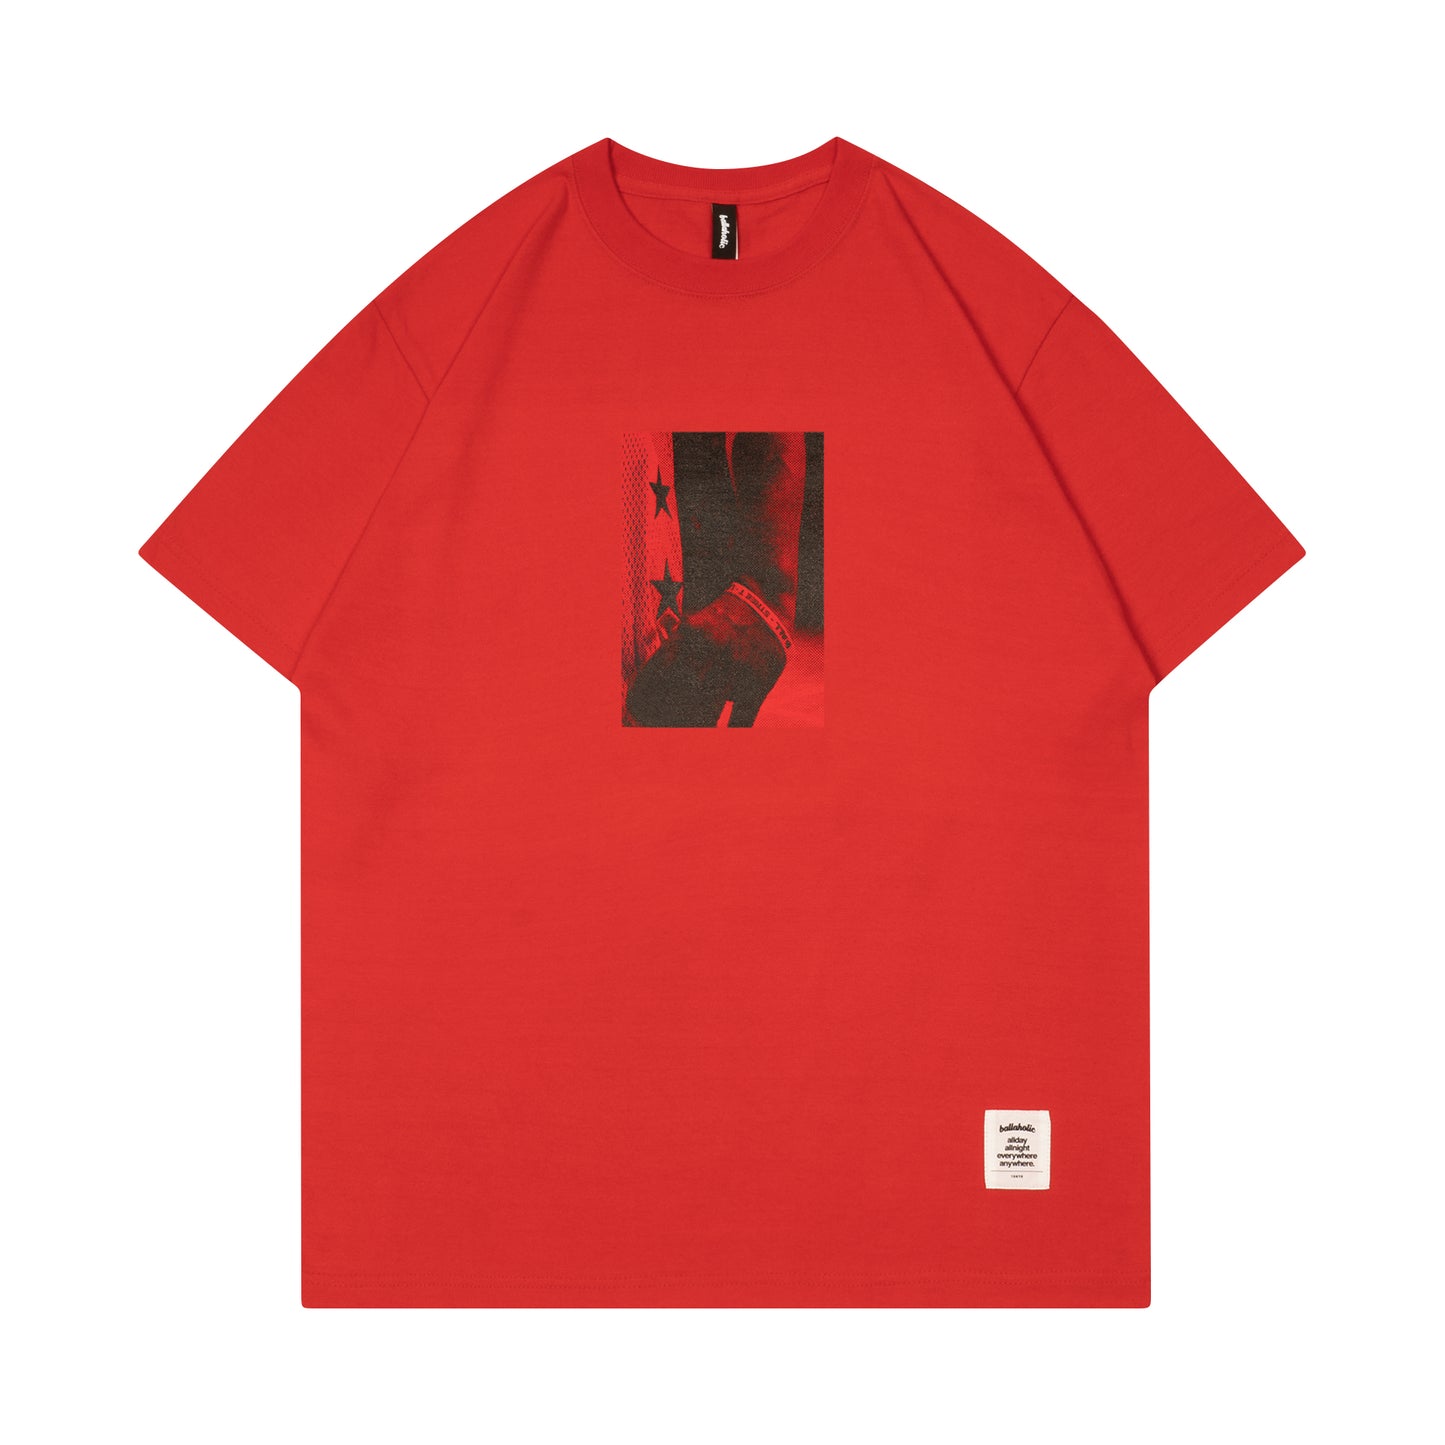 B-S-L-H Tee (high red)